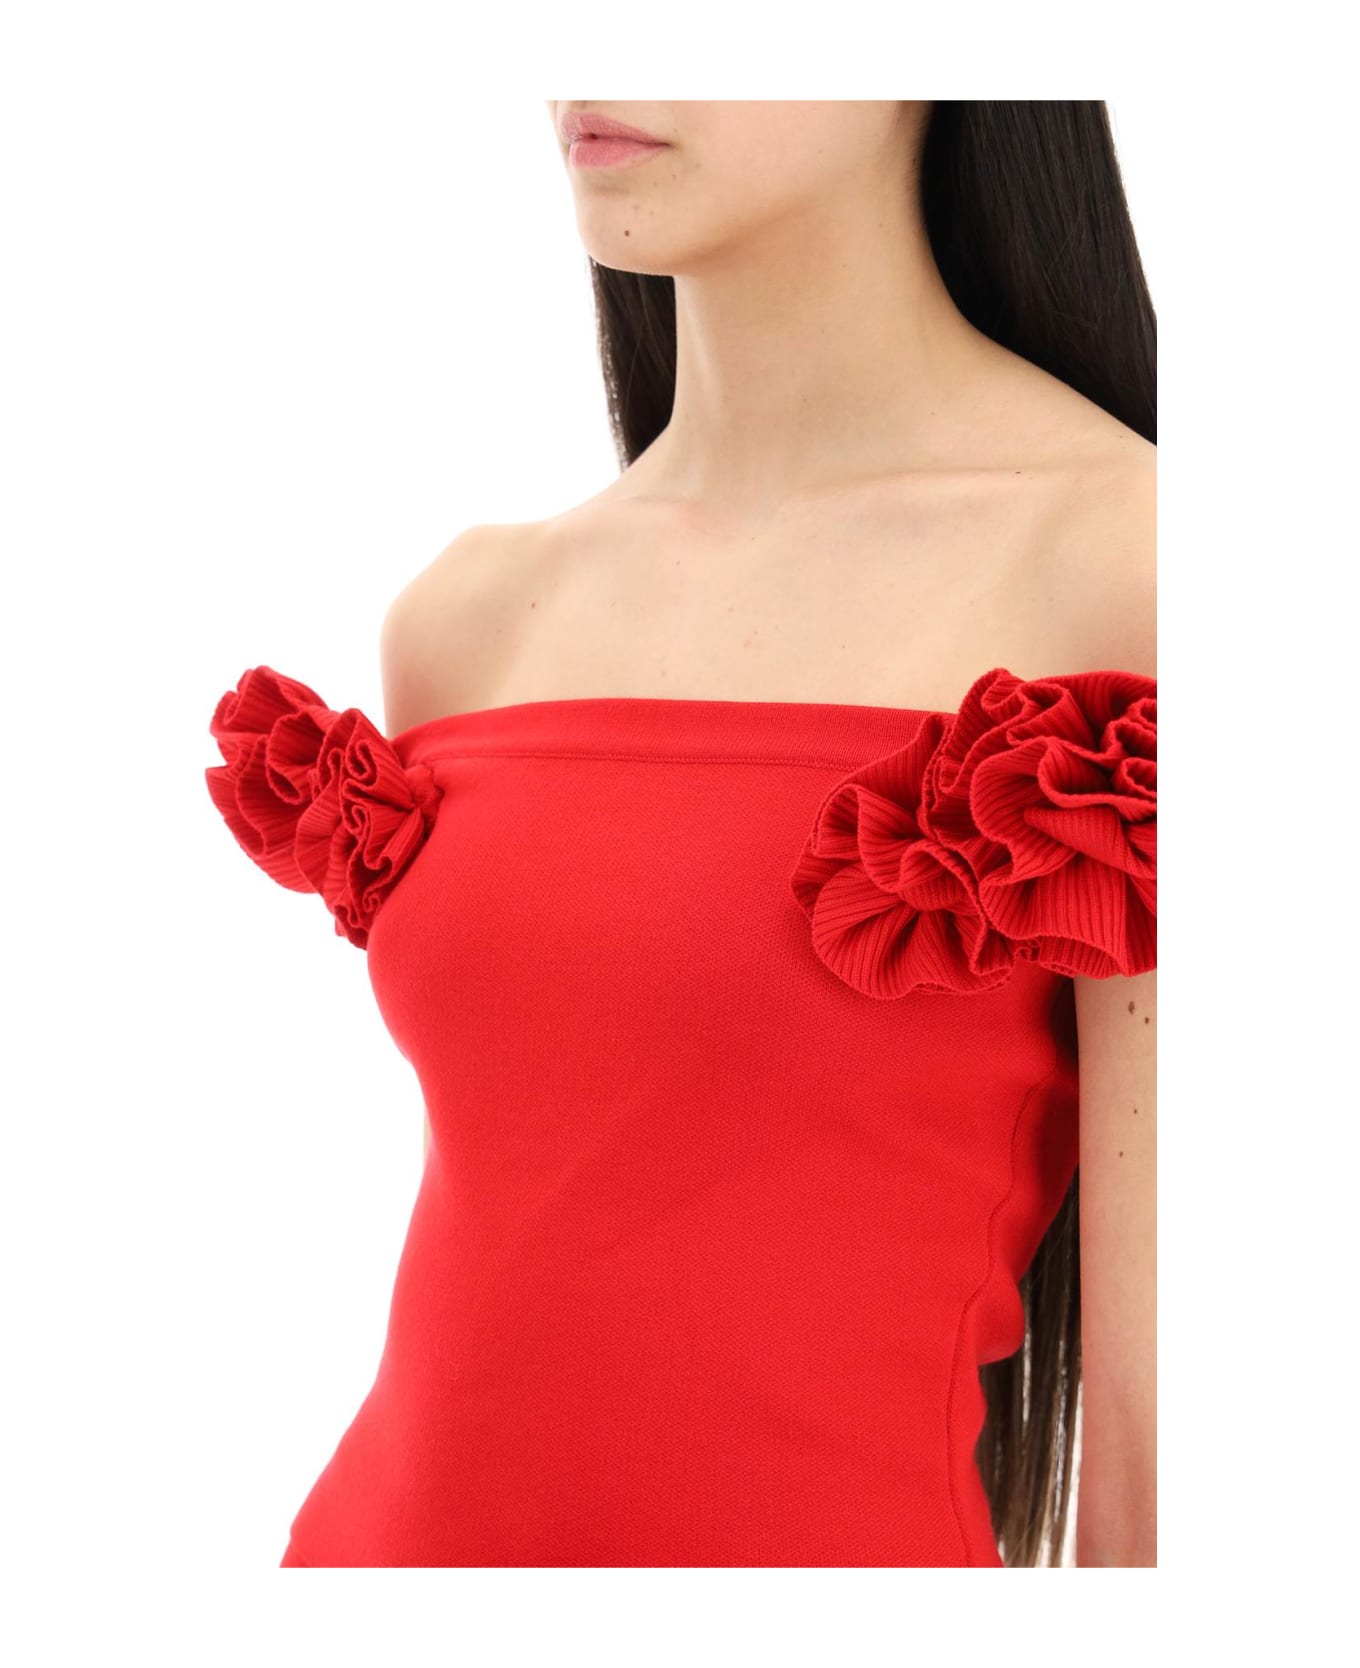 Magda Butrym Fitted Top With Roses - RED (Red) トップス